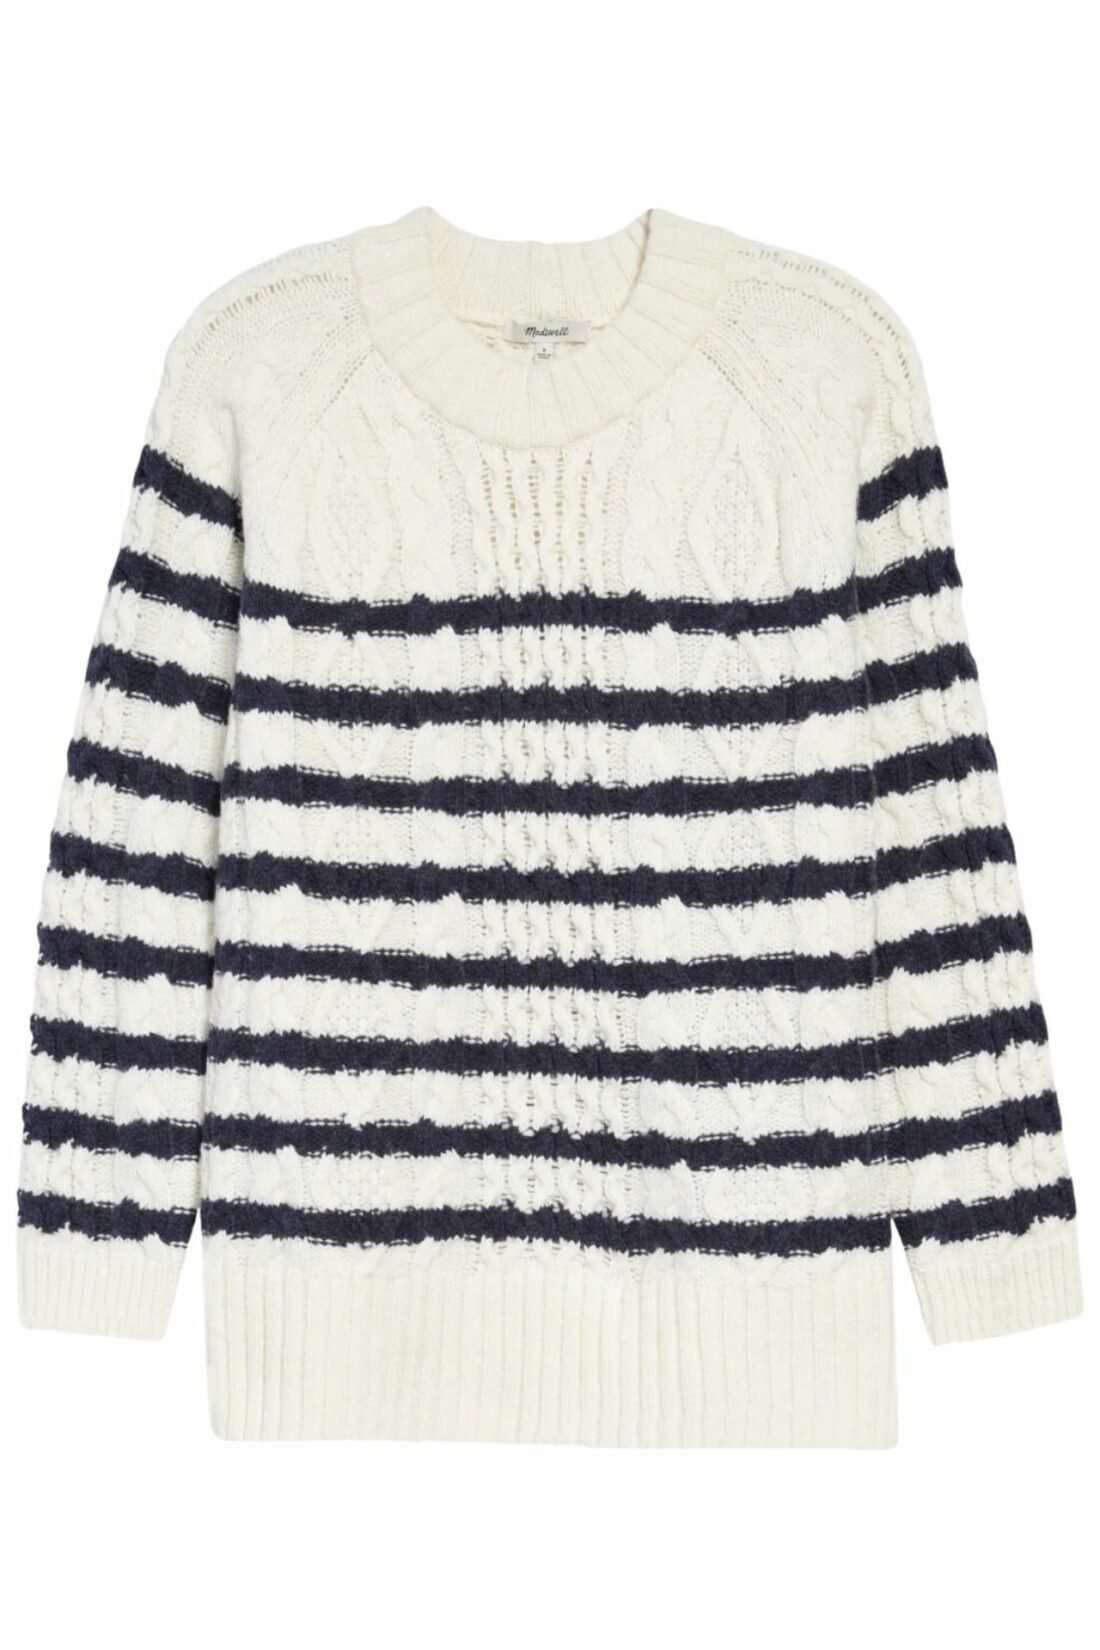 EVERY DAY BASICS WISH LIST WITH NORDSTROM - Atlantic-Pacific